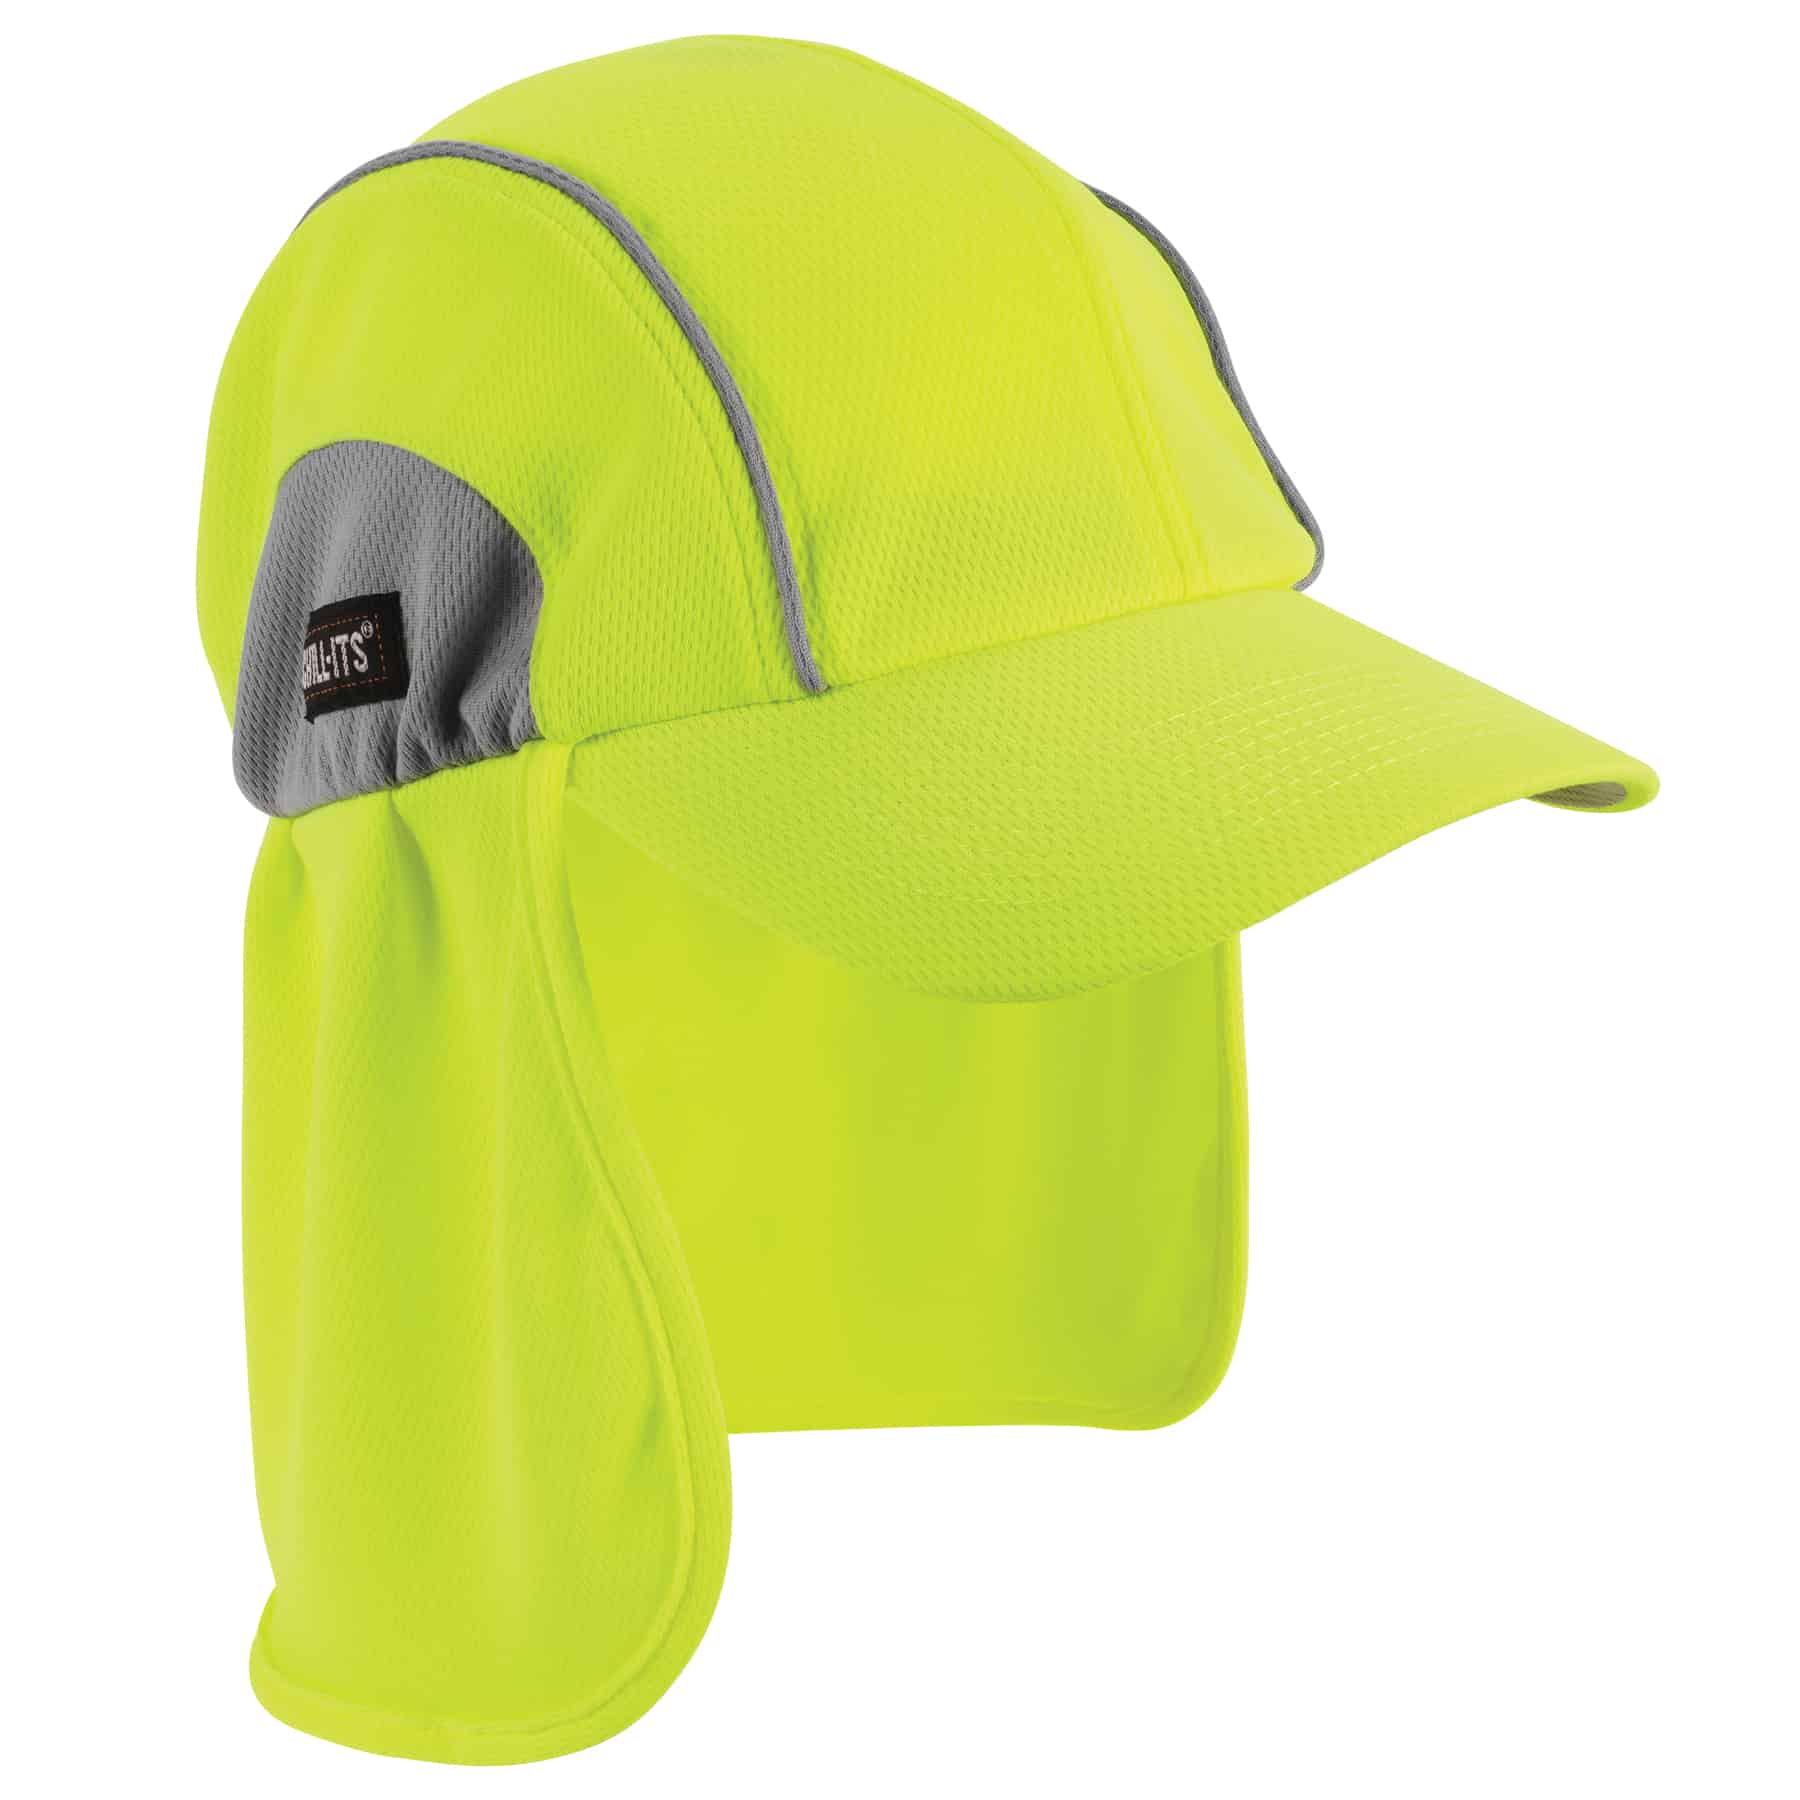 Chill-Its 6650 High-Performance Cooling Hat and Neck Shade